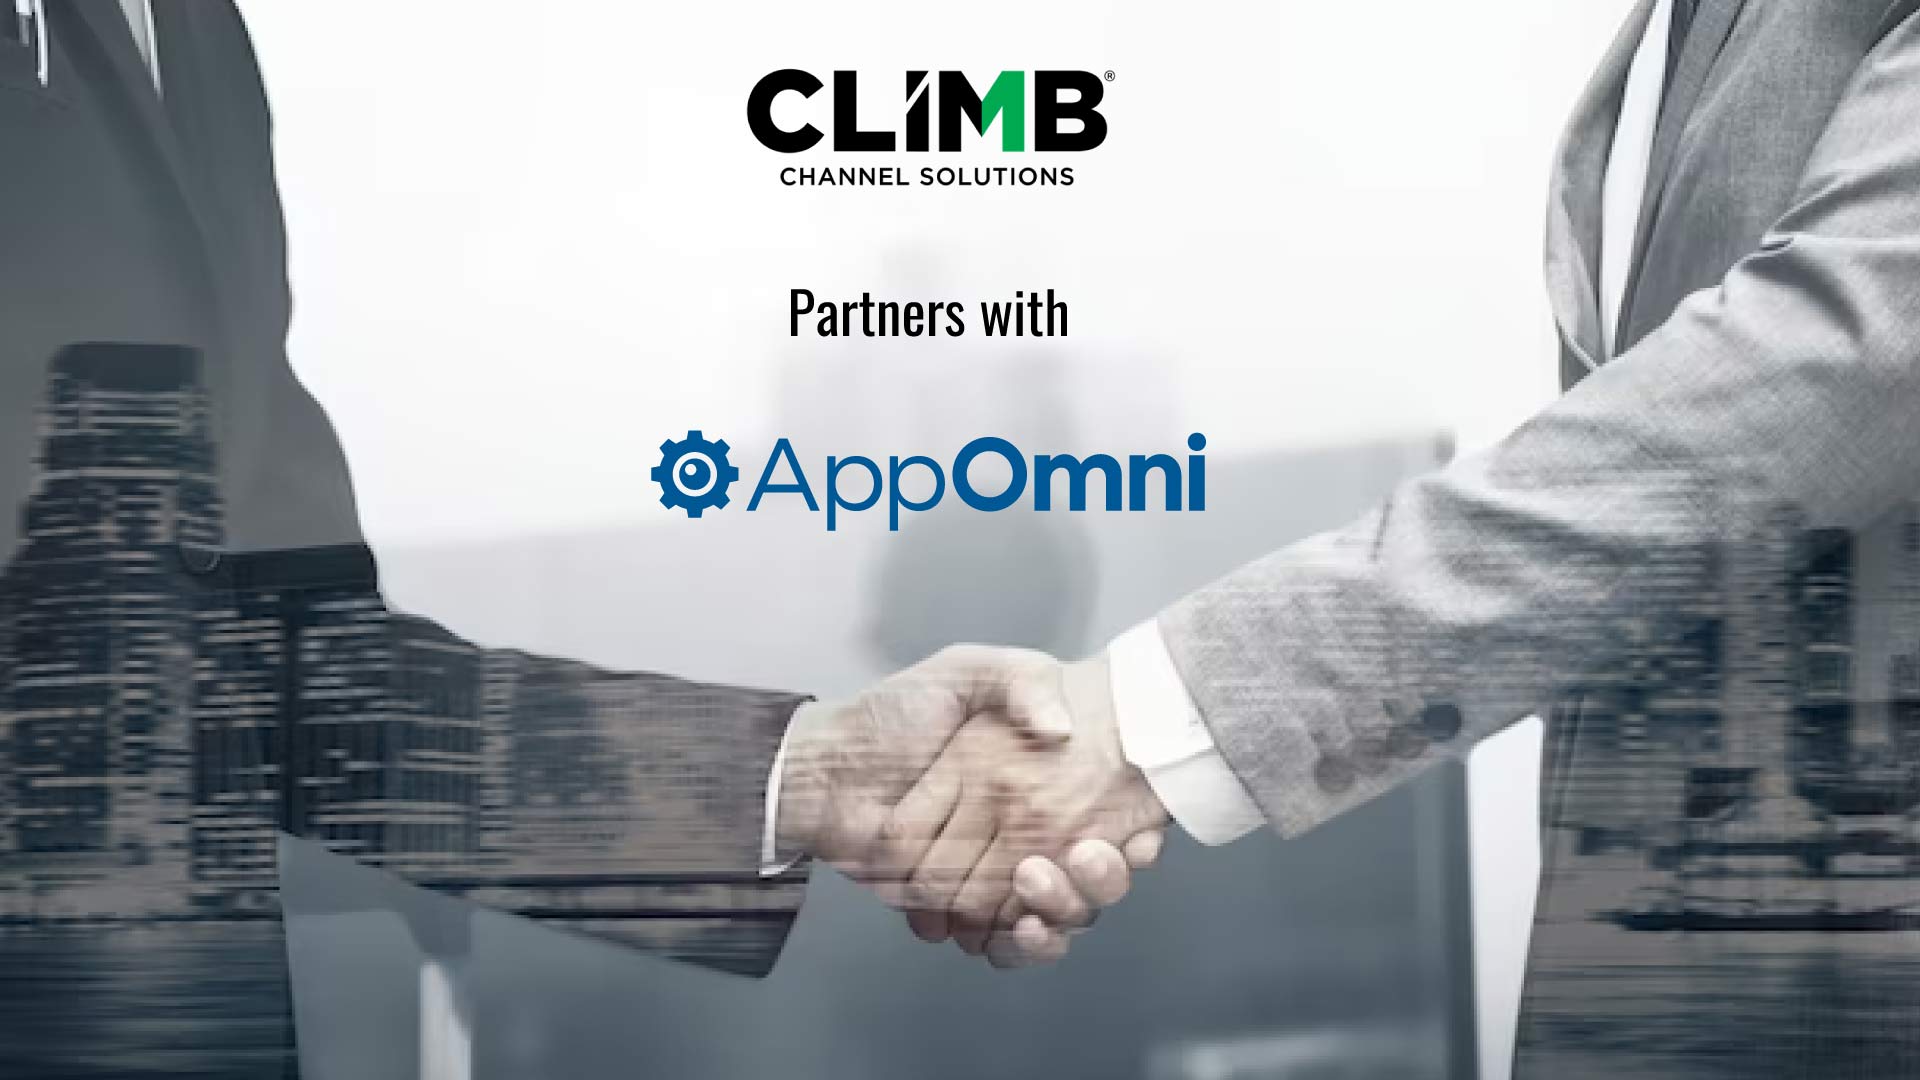 Climb Channel Solutions Partners with AppOmni, Offering Data Visibility and Security of SaaS Solutions